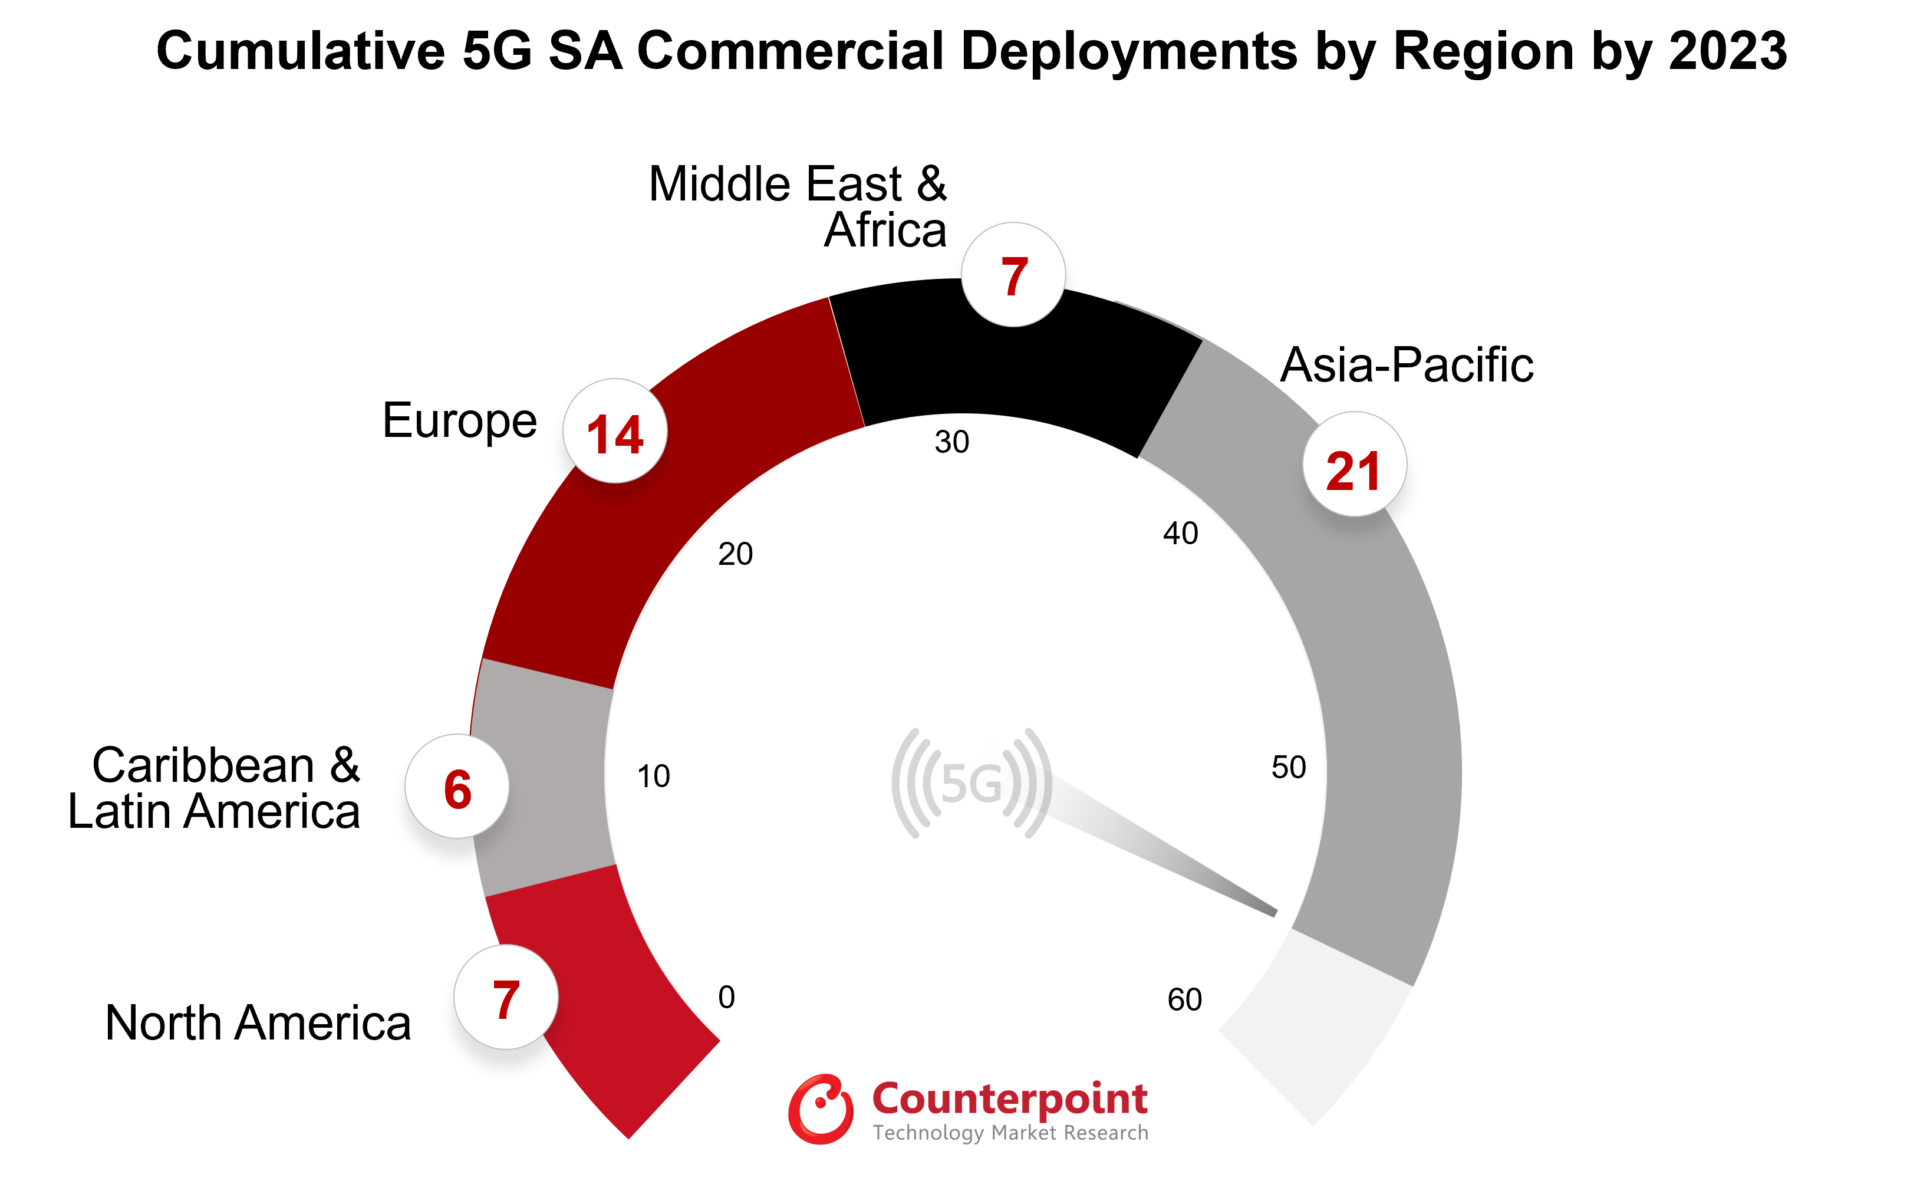 Cumulative 5G SA Commercial Deployments by Region by 2023